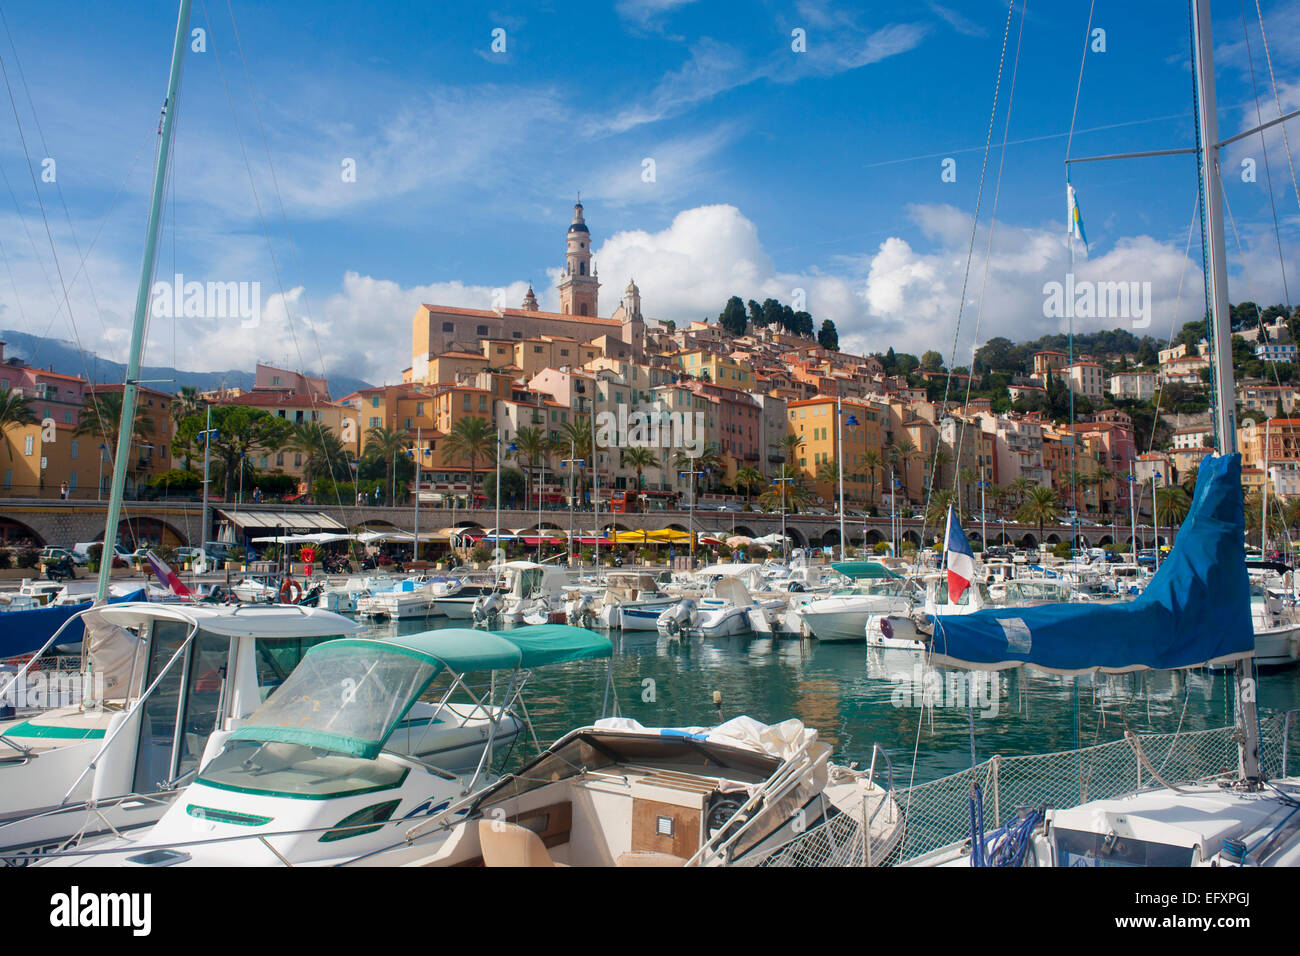 Menton Harbour and town with boats in foreground Cote d'Azur French Riviera Provence France Stock Photo